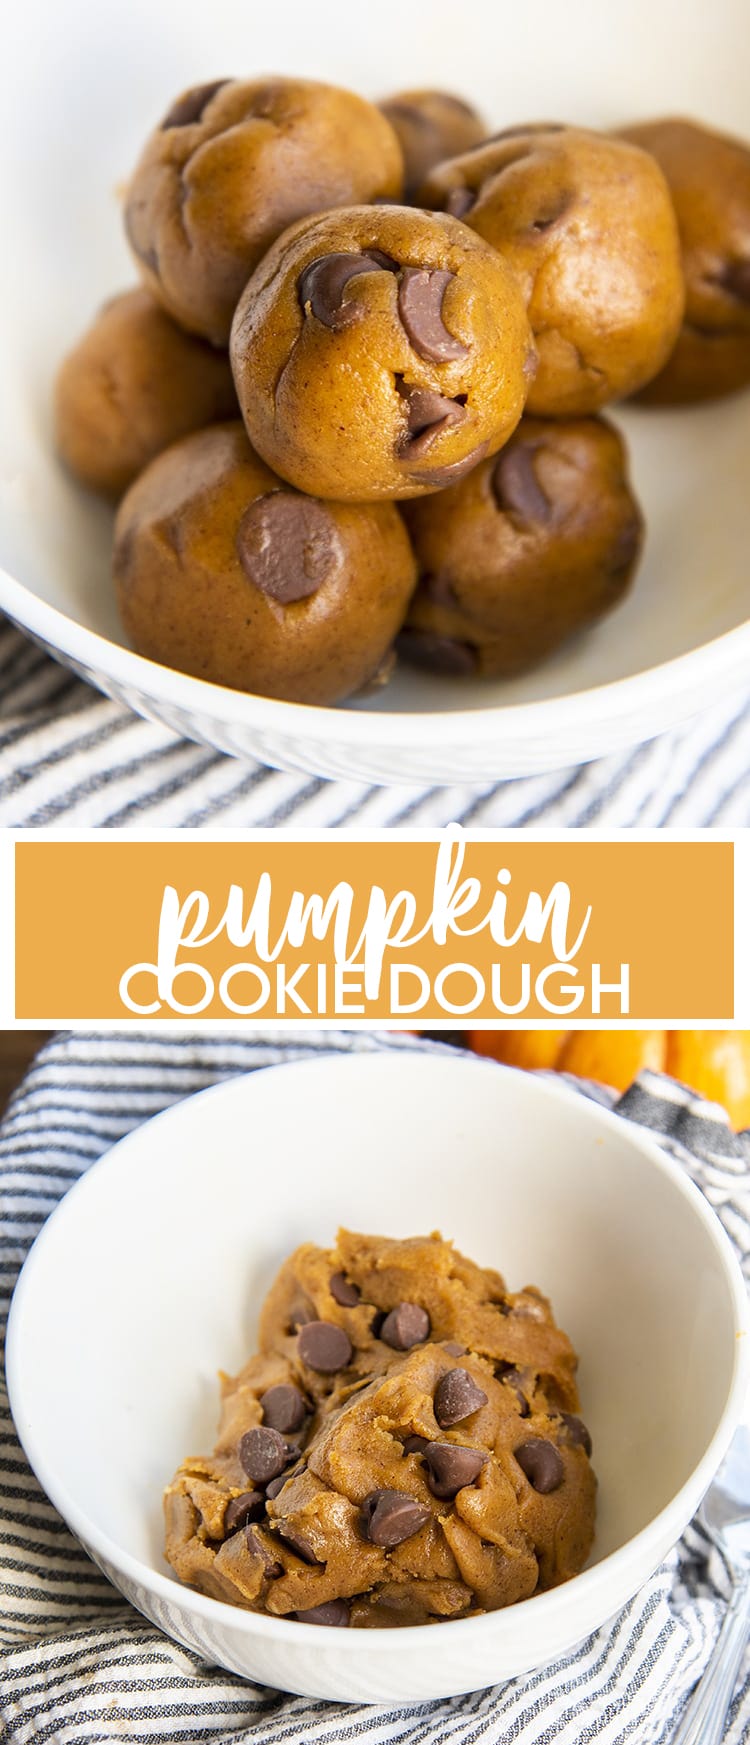 Pumpkin cookie dough balls shown in a collage with text overlay that reads pumpkin cookie dough.